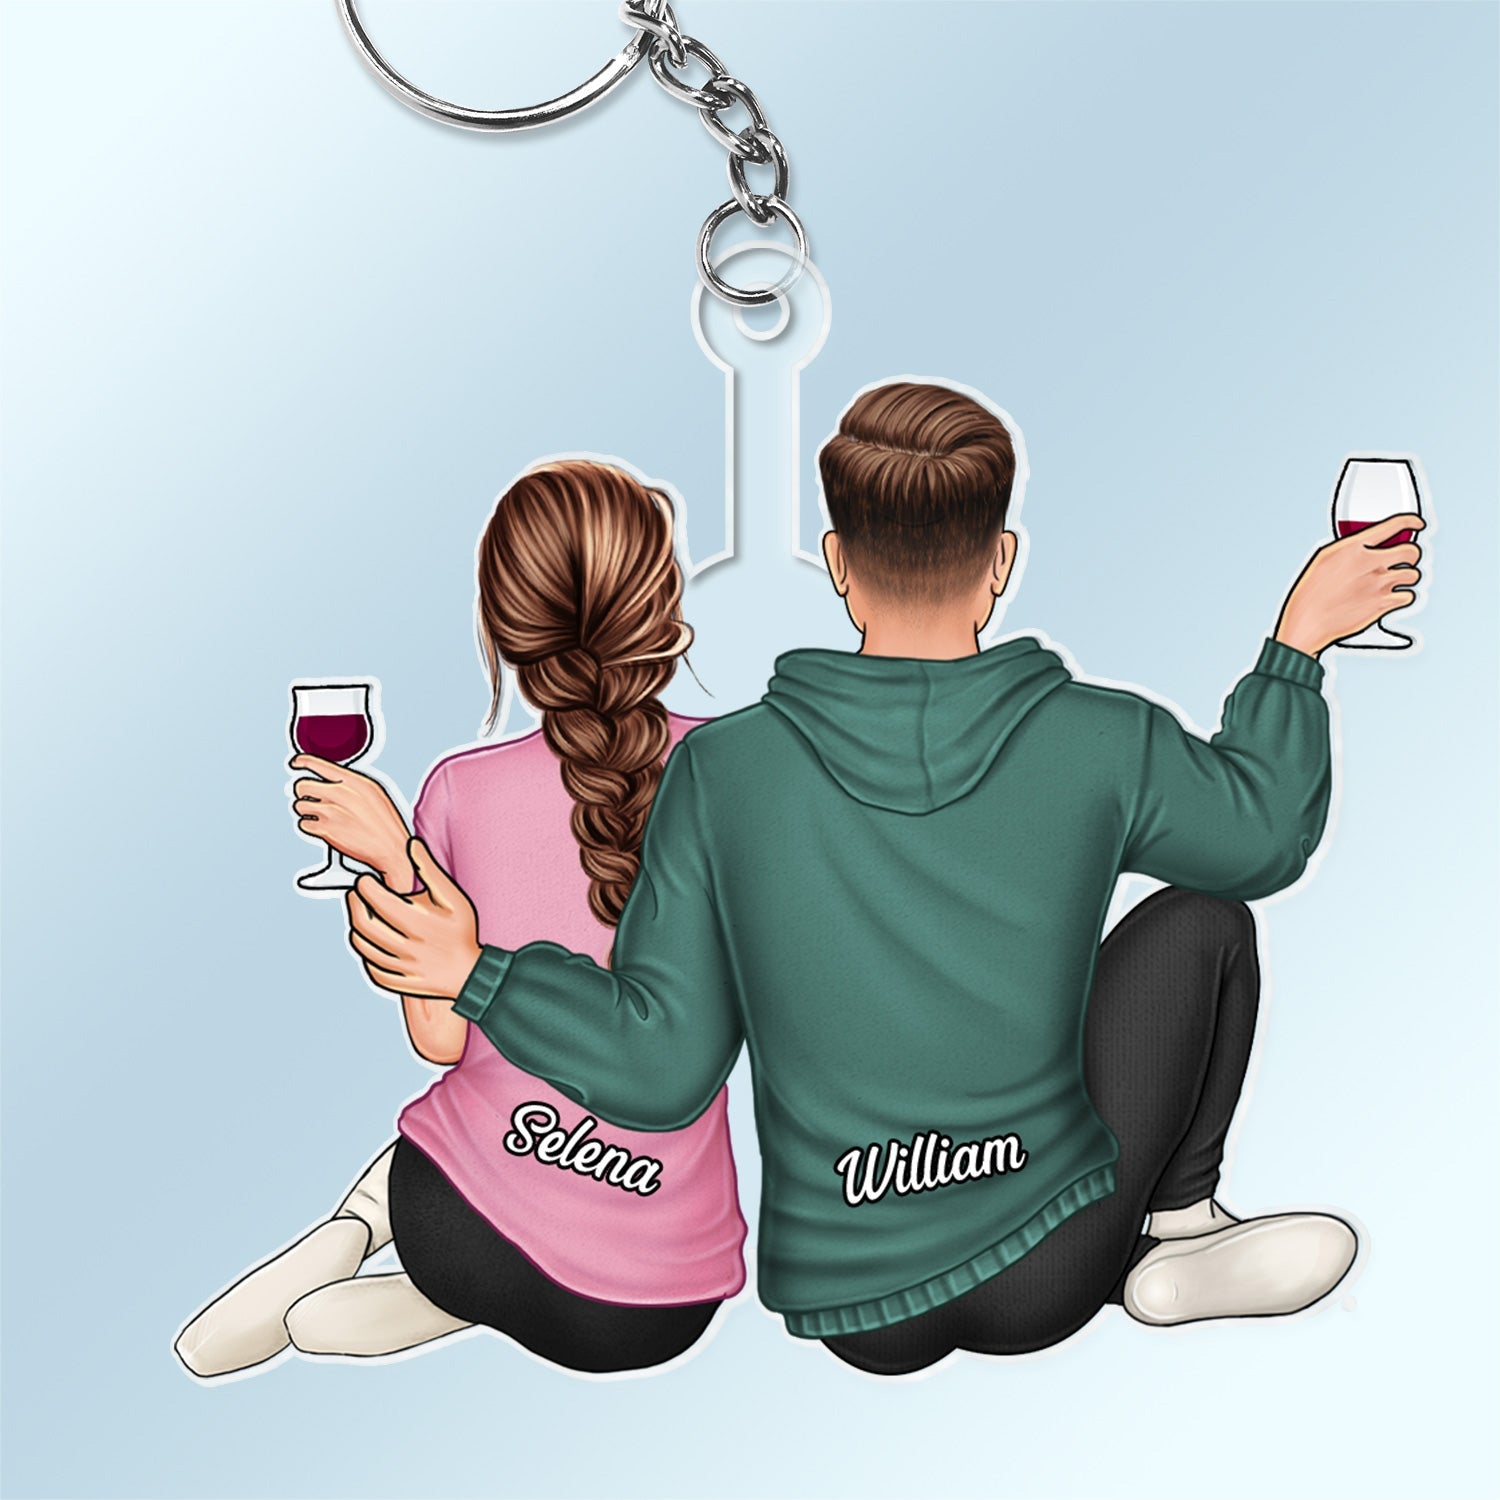 Couple Hugging - Anniversary Gift For Couples - Personalized Acrylic Keychain